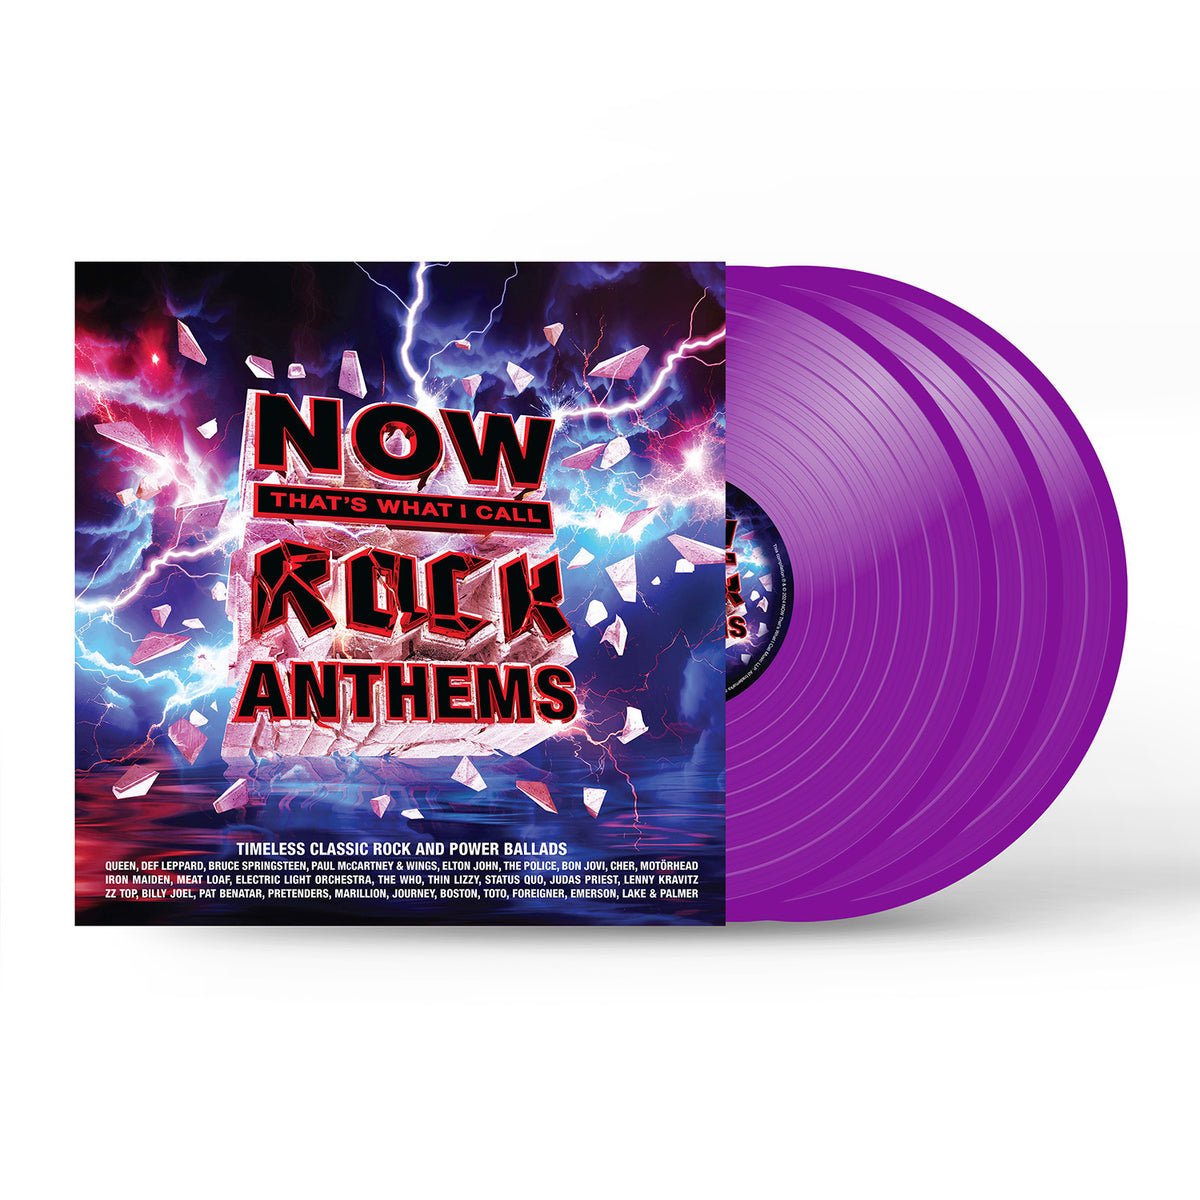 CD Shop - V/A NOW THAT S WHAT I CALL ROCK ANTHEMS